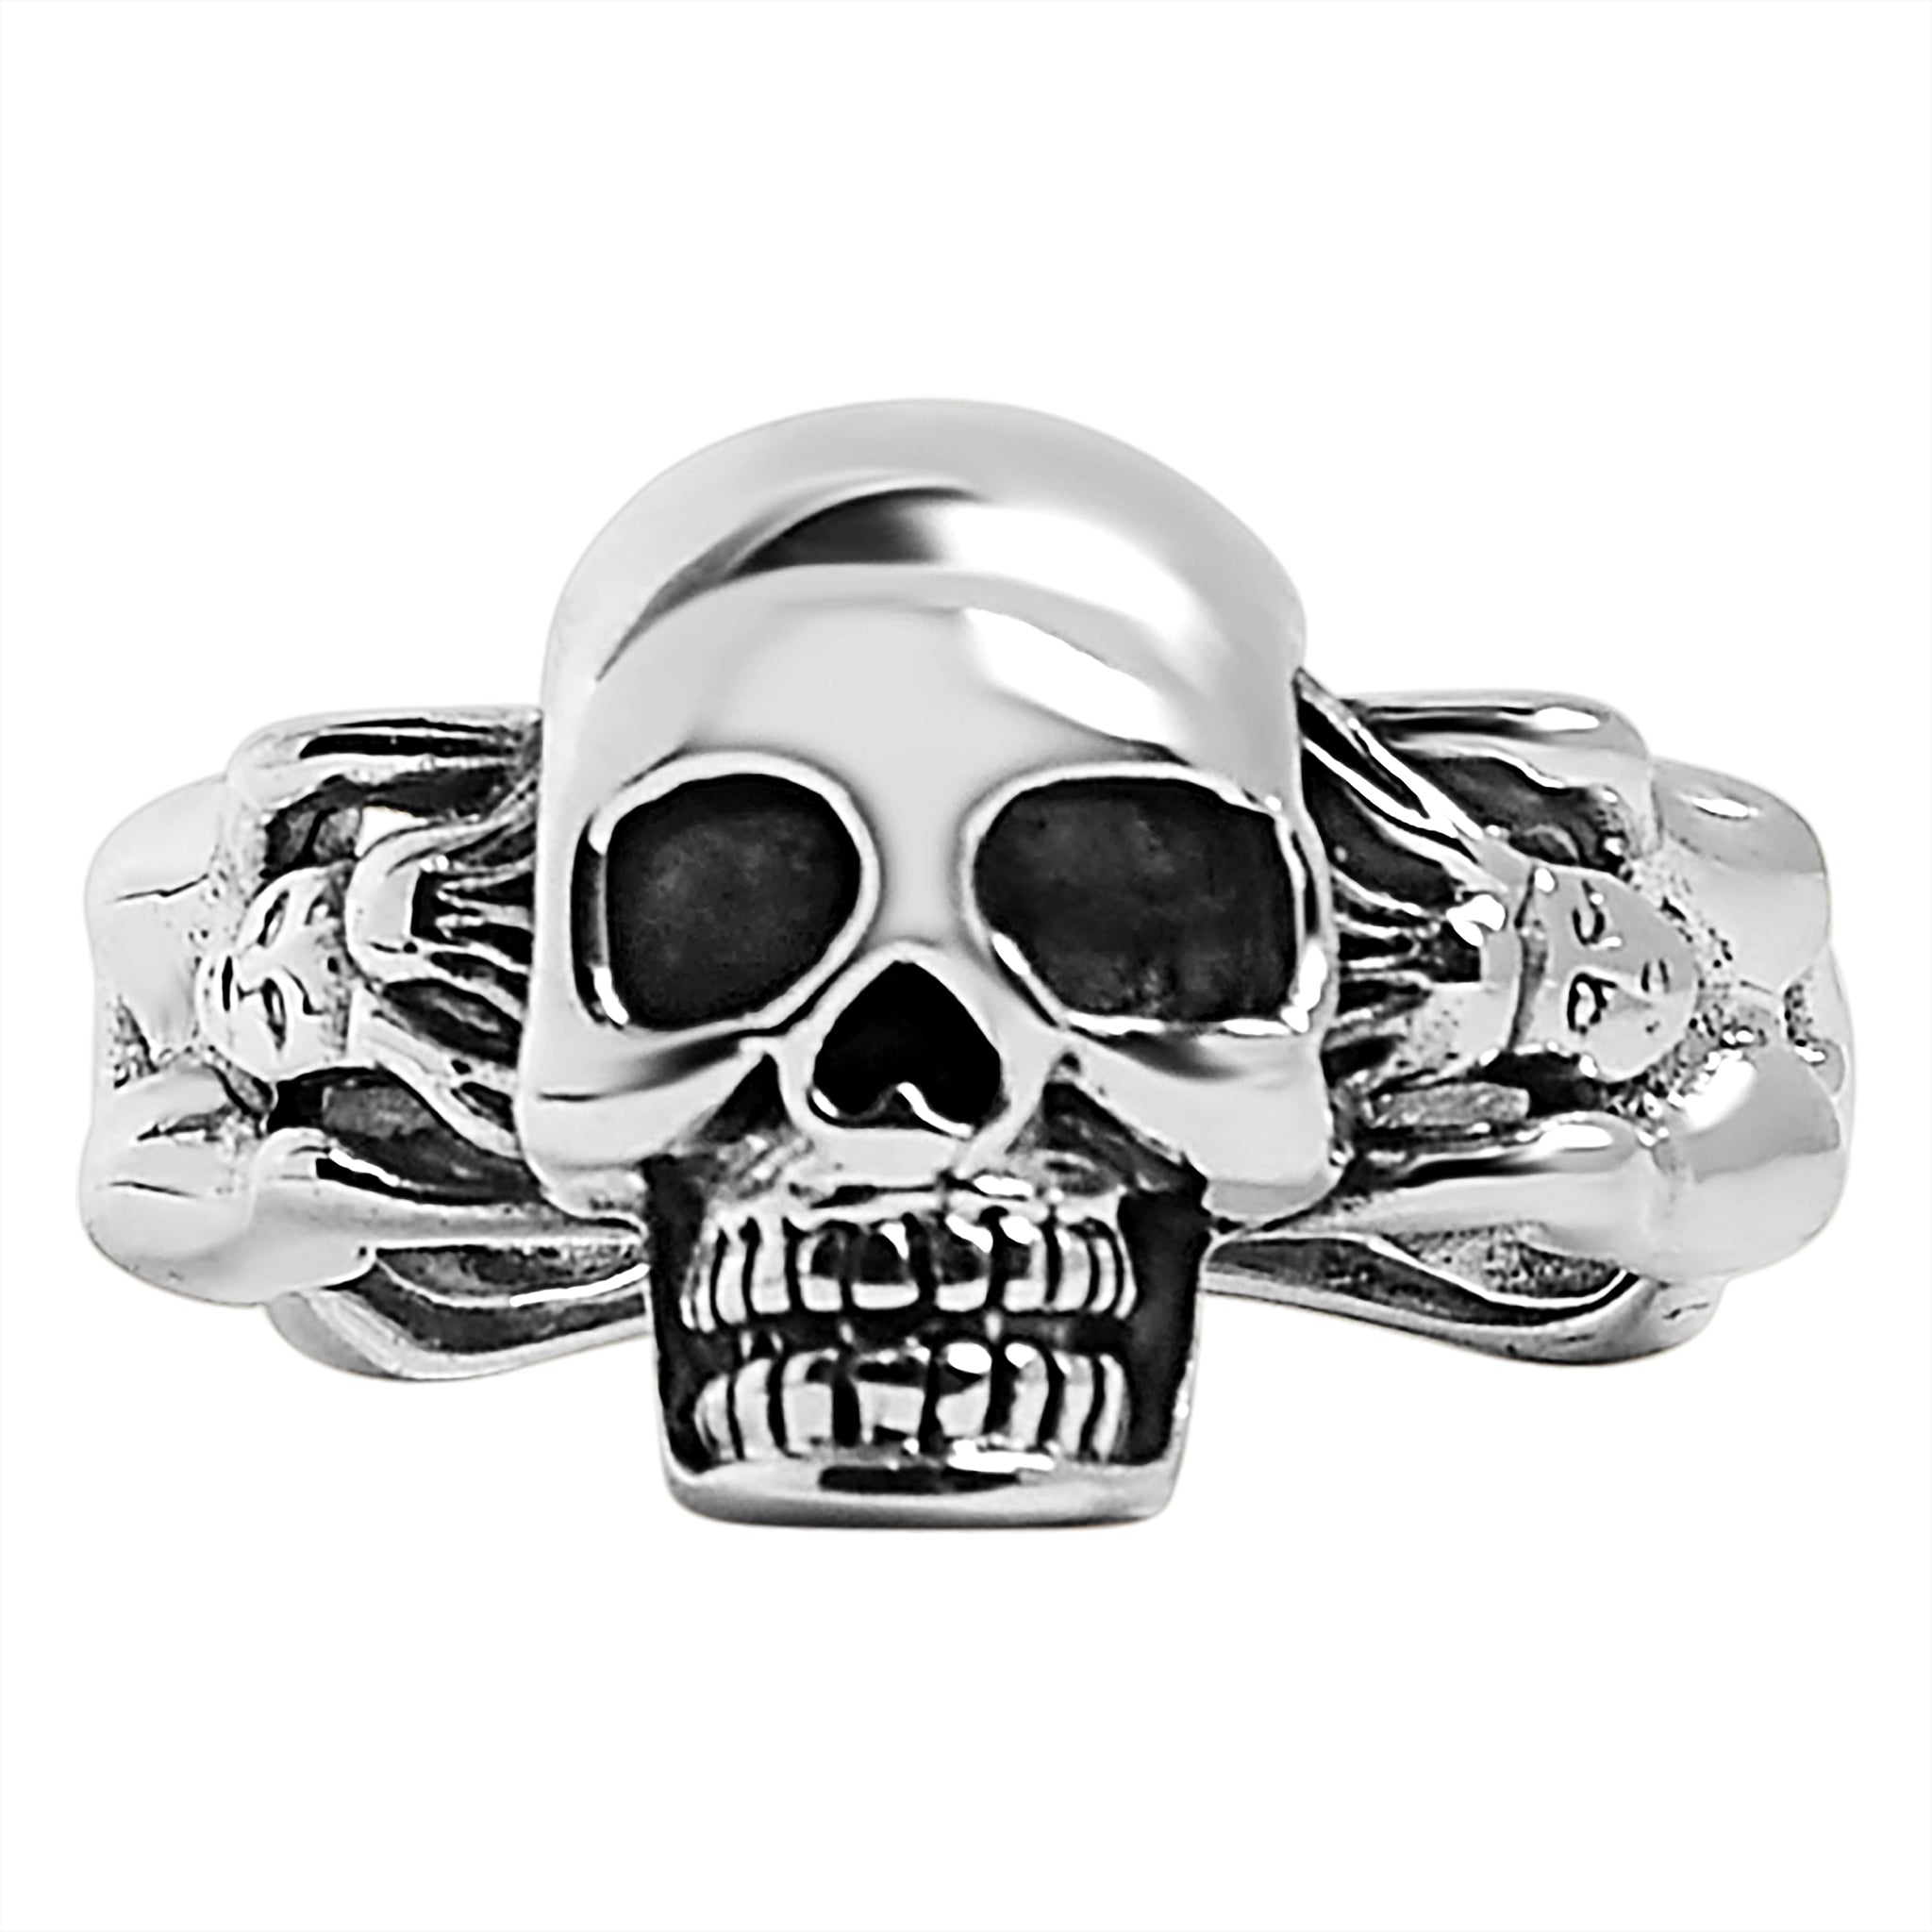 Sterling Silver Skull and Nude Women Ring / SSR0017-sterling silver pendant- .925 sterling silver pendant- Black Friday Gift- silver pendant- necklace pendant